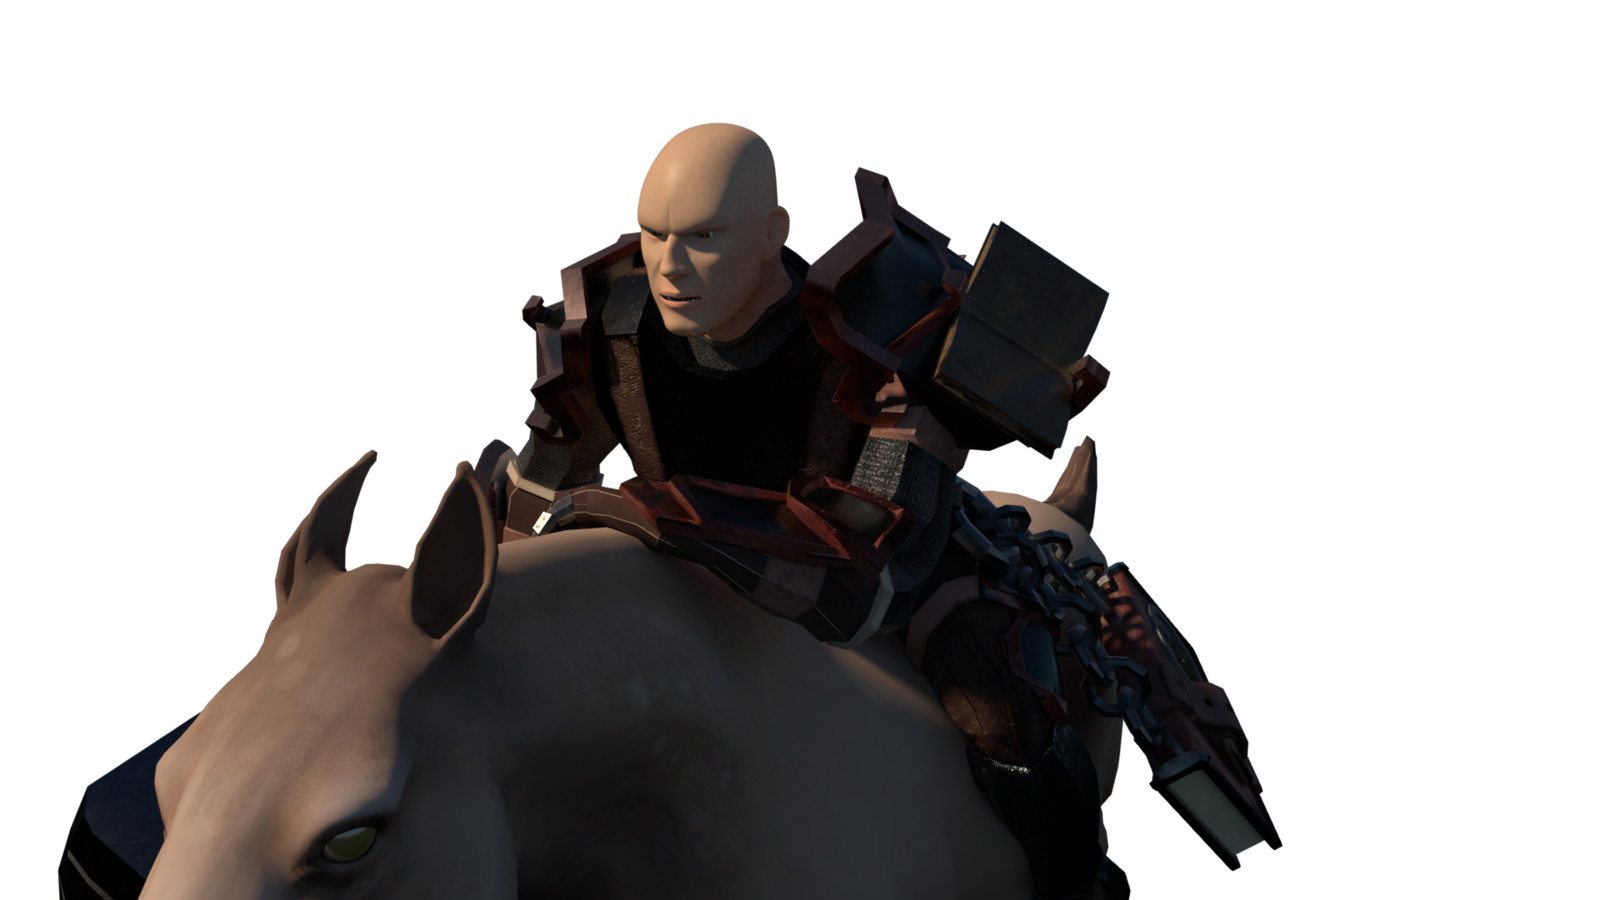 Cleric riding his horse (close up)